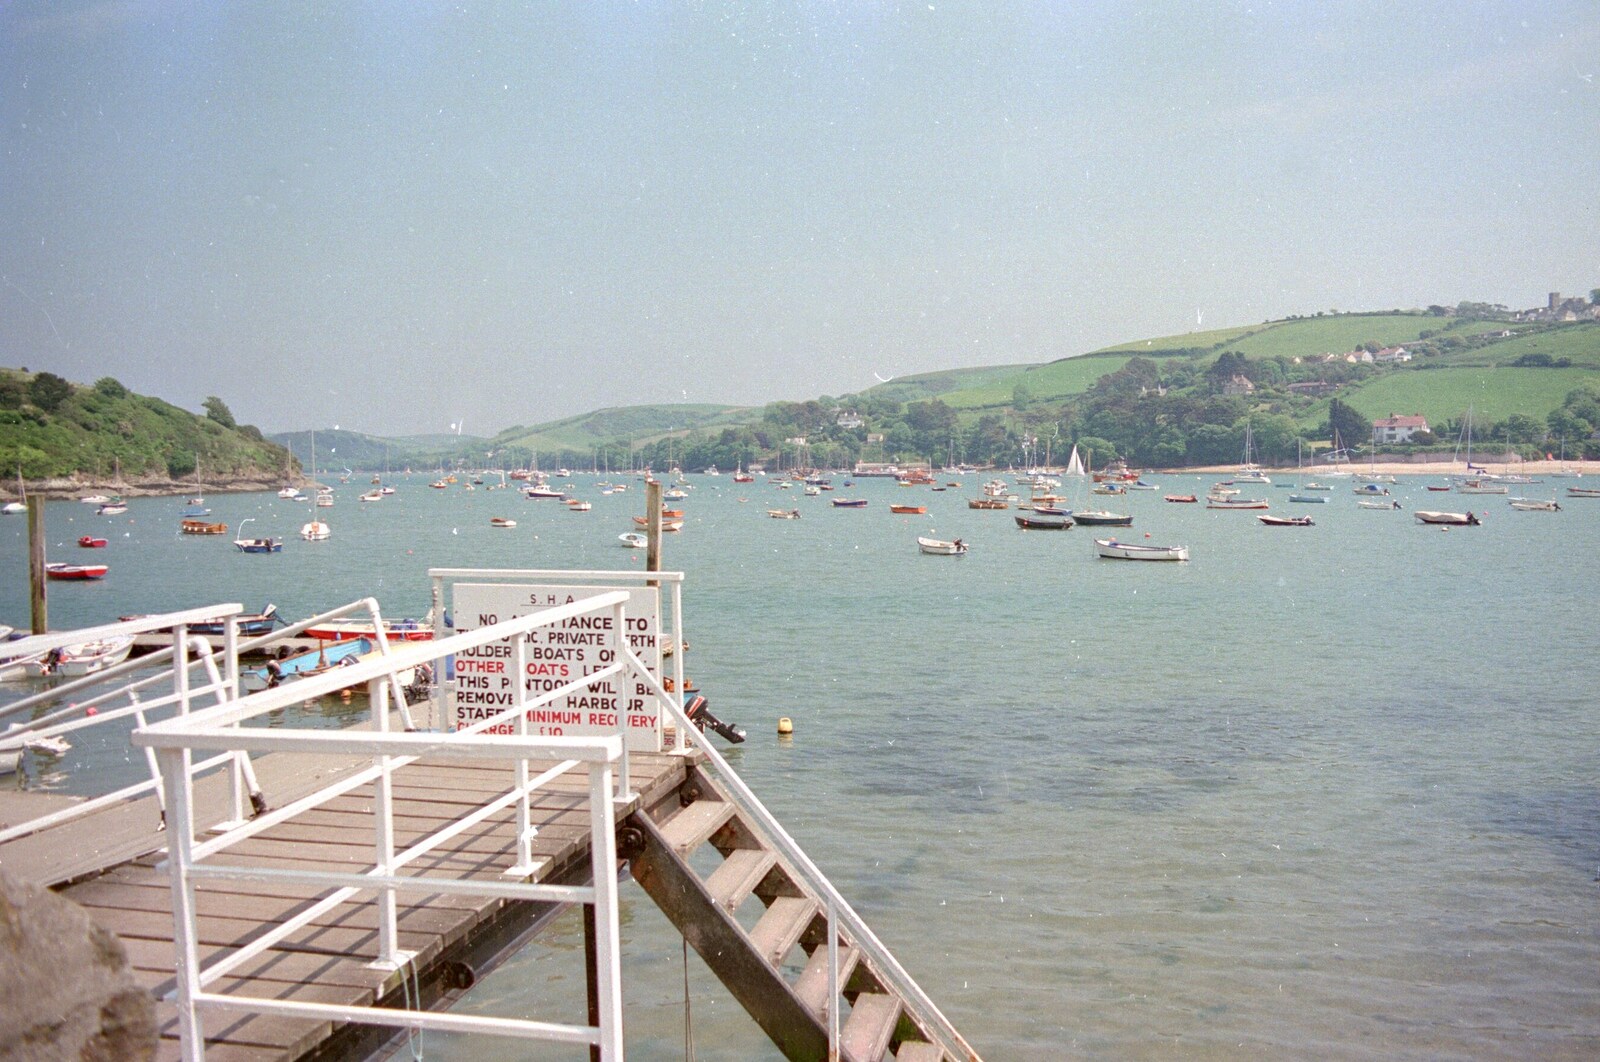 The Salcombe Jetty from Uni: Twenty One Guns and Footie on the Beach, Plymouth Hoe and Salcombe, Devon - 15th June 1986